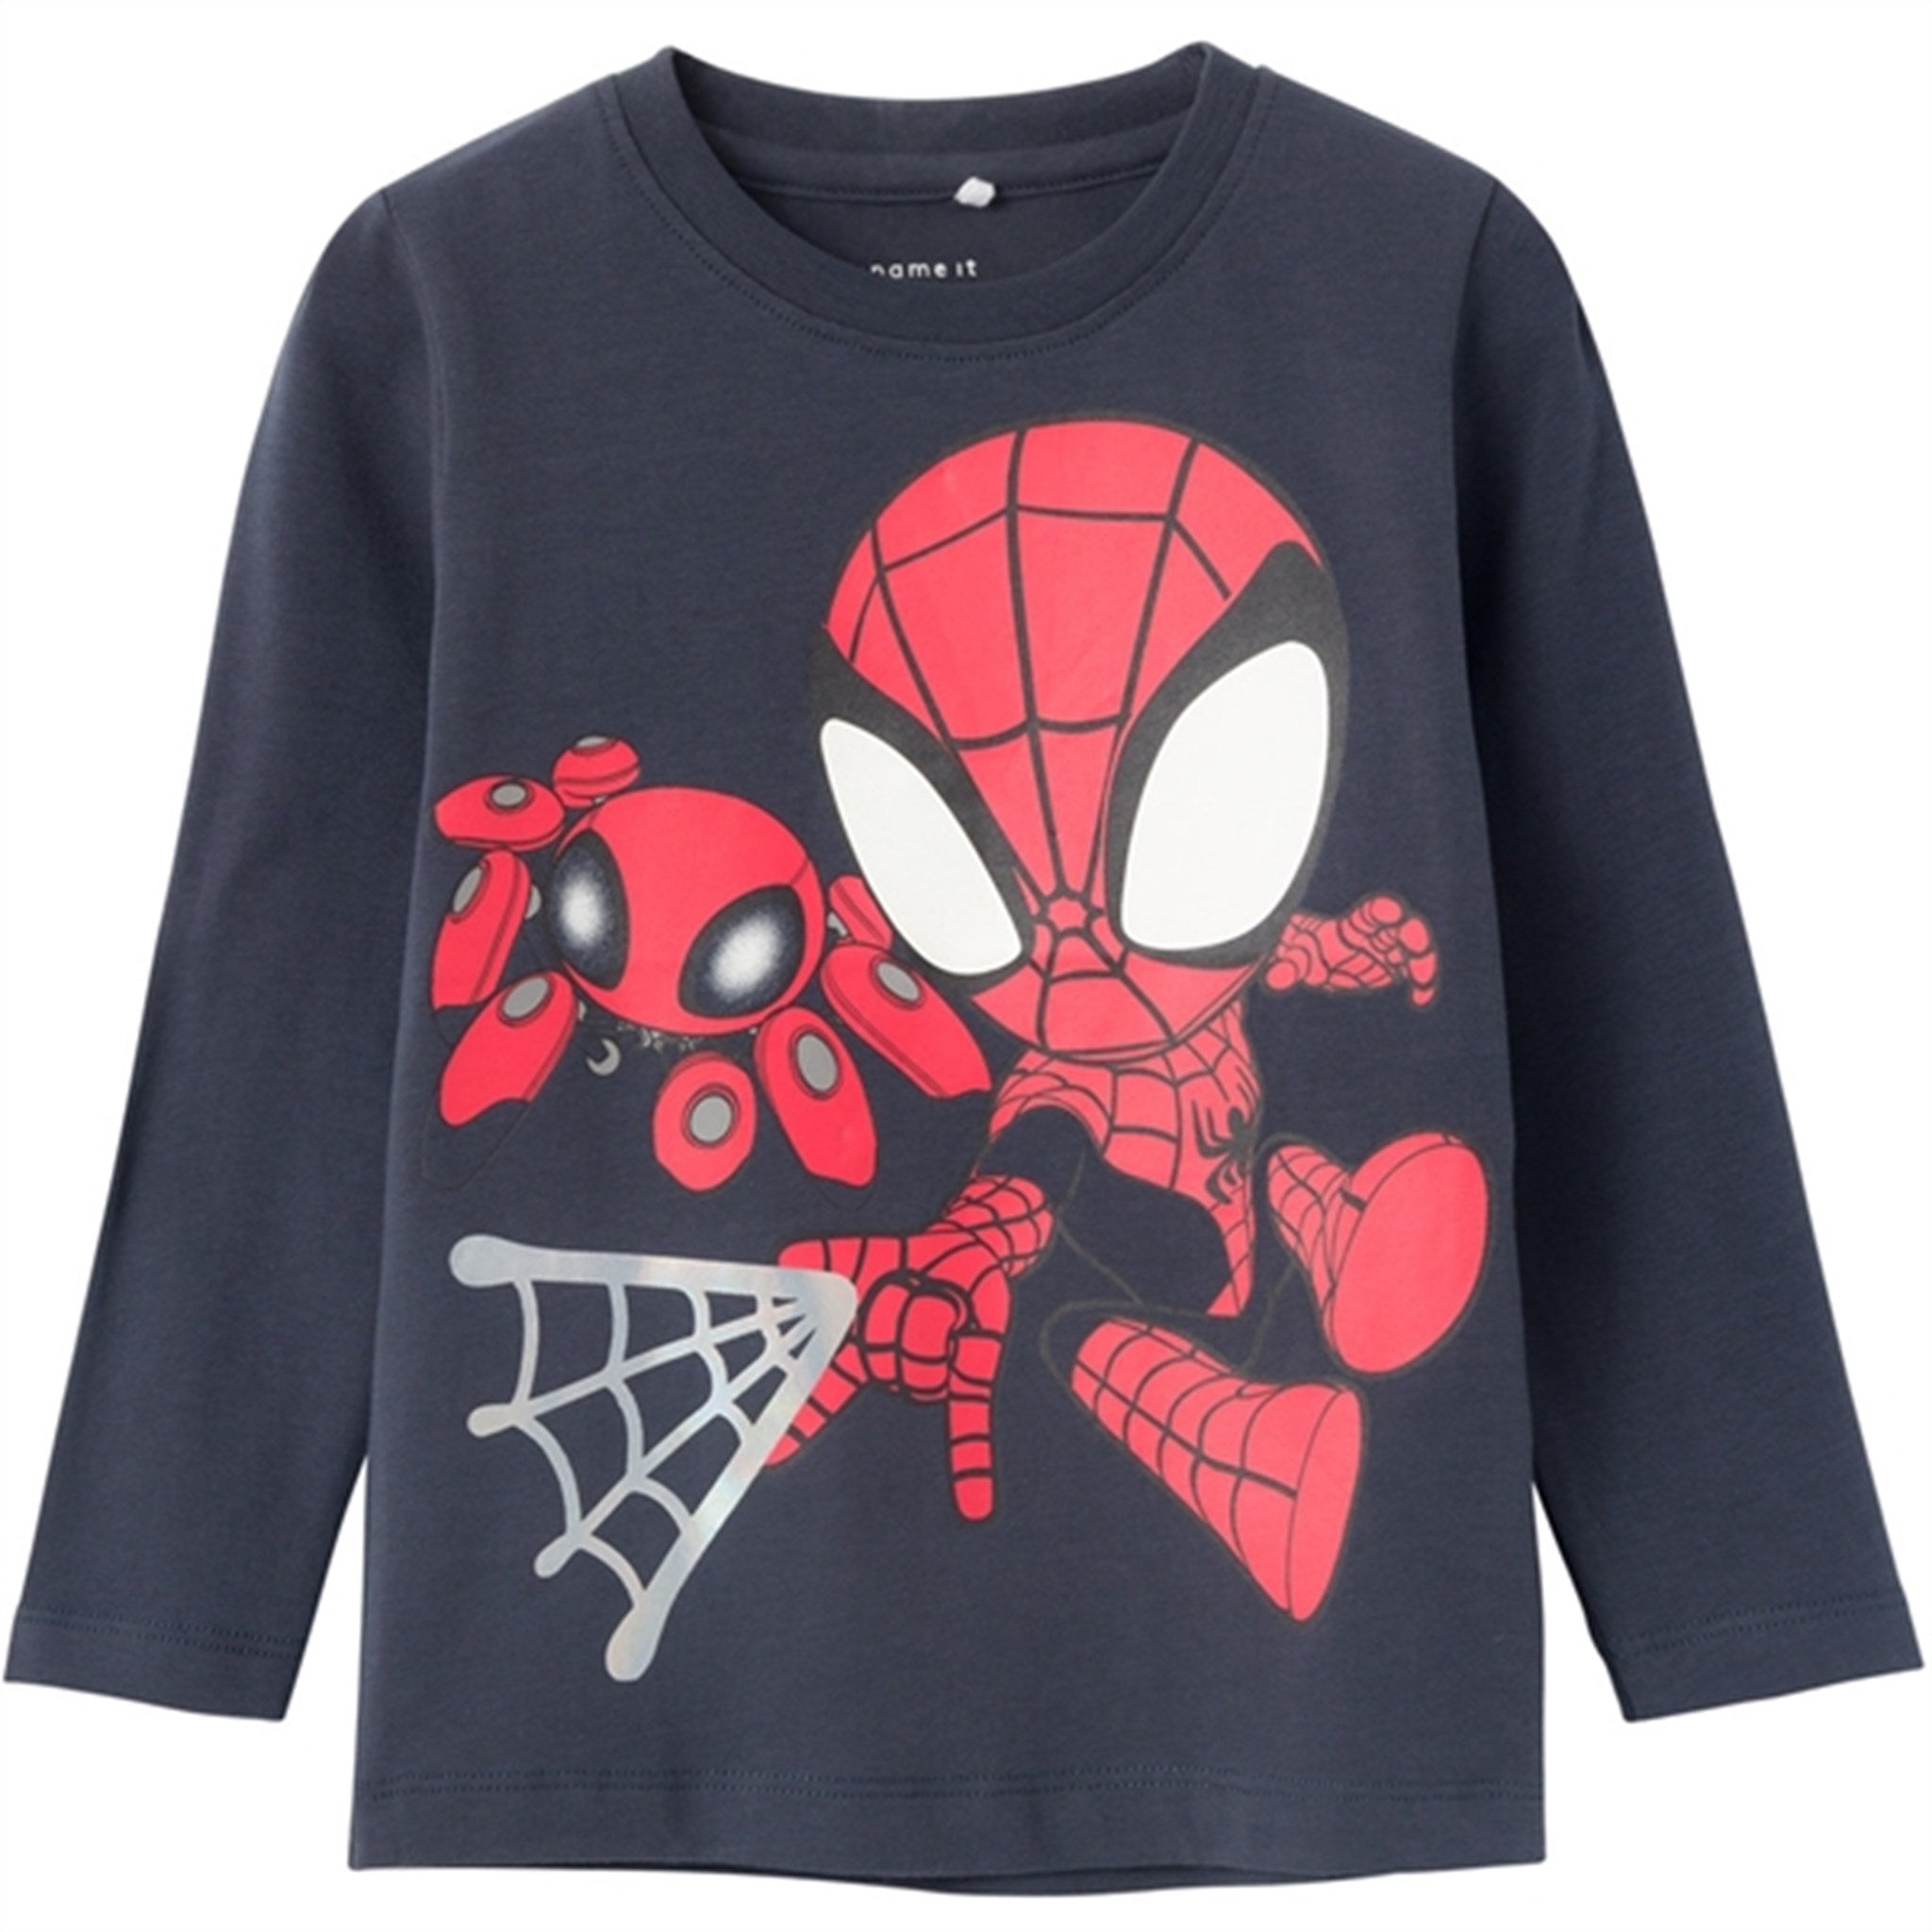 Name it India Ink Domi Spidey Bluse